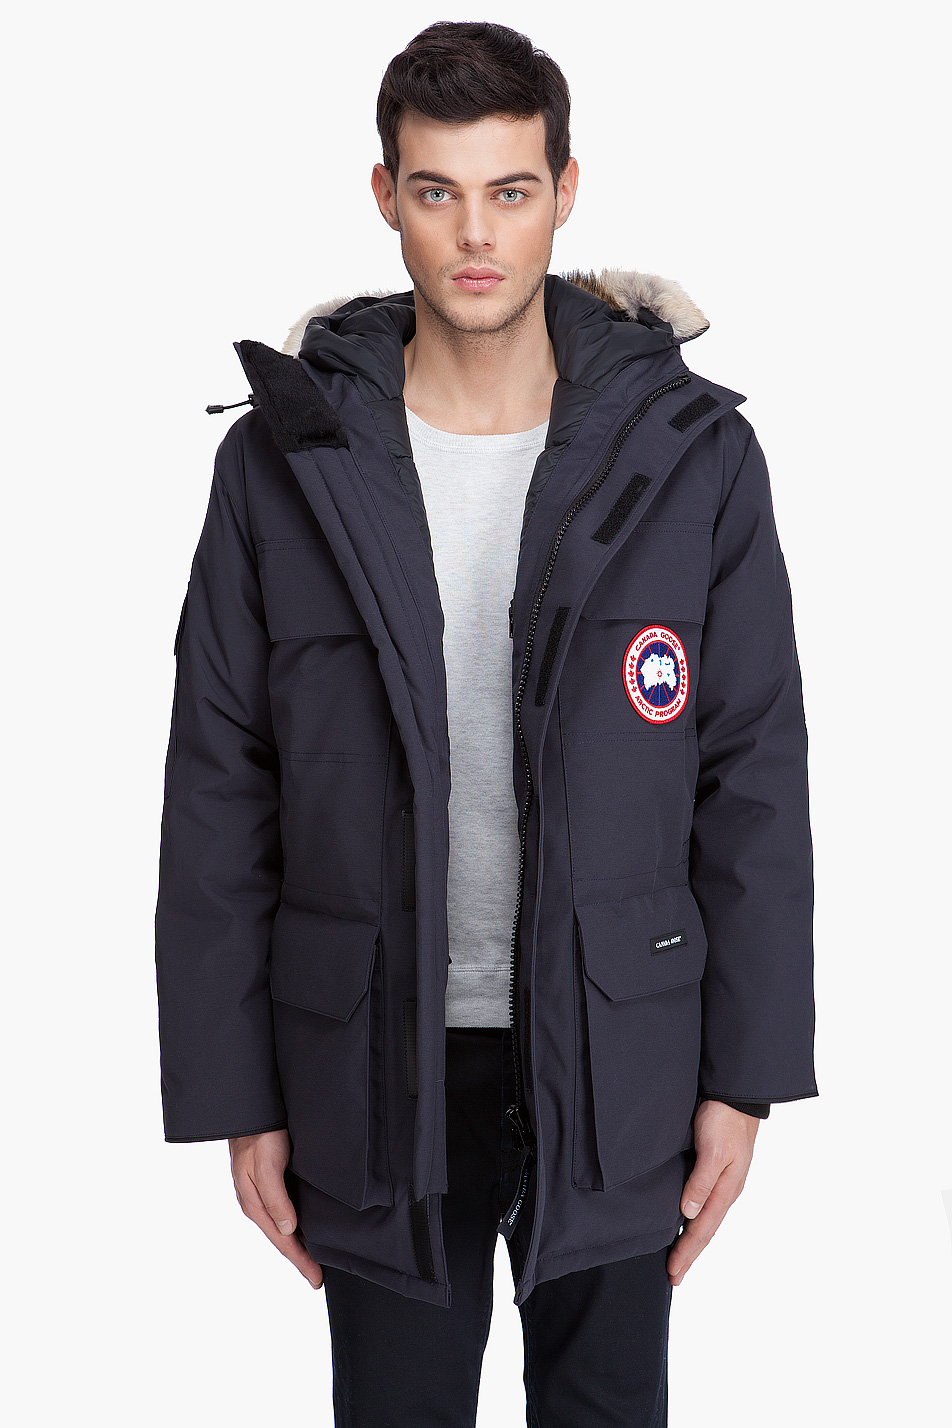 Canada Goose Expedition Parka in Navy (Blue) for Men - Lyst